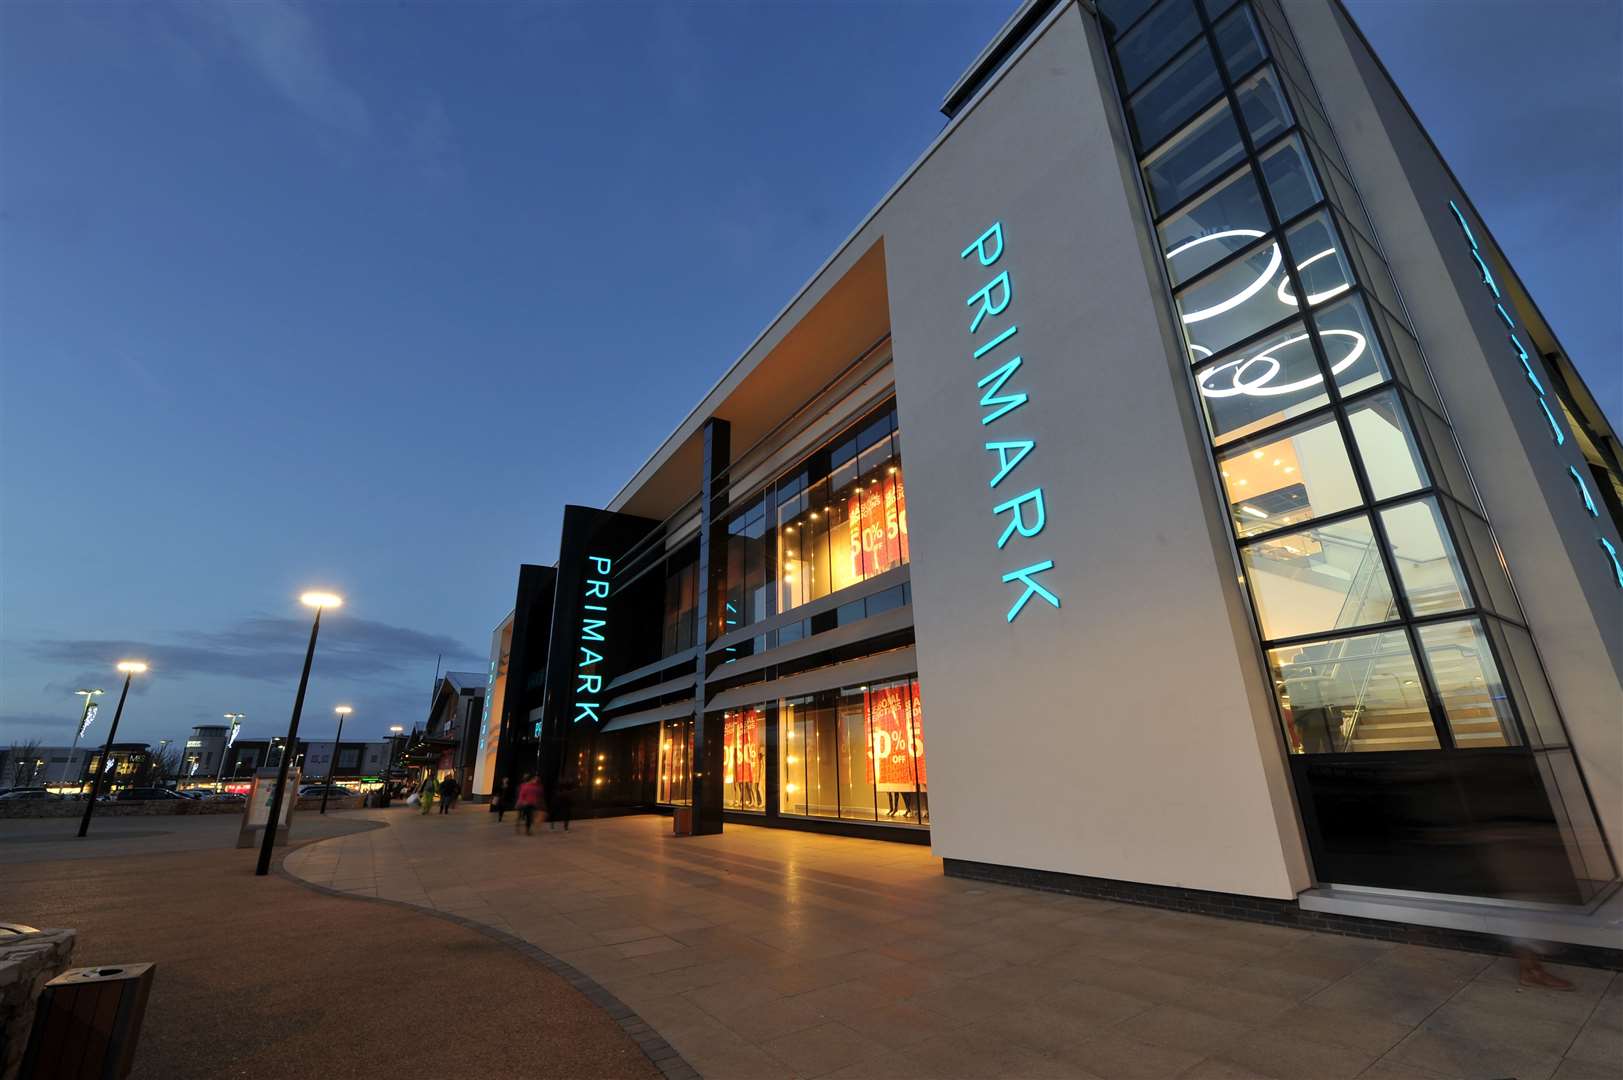 Primark, here at Westwood Cross in Broadstairs, is launching a new website that will be ready early next year